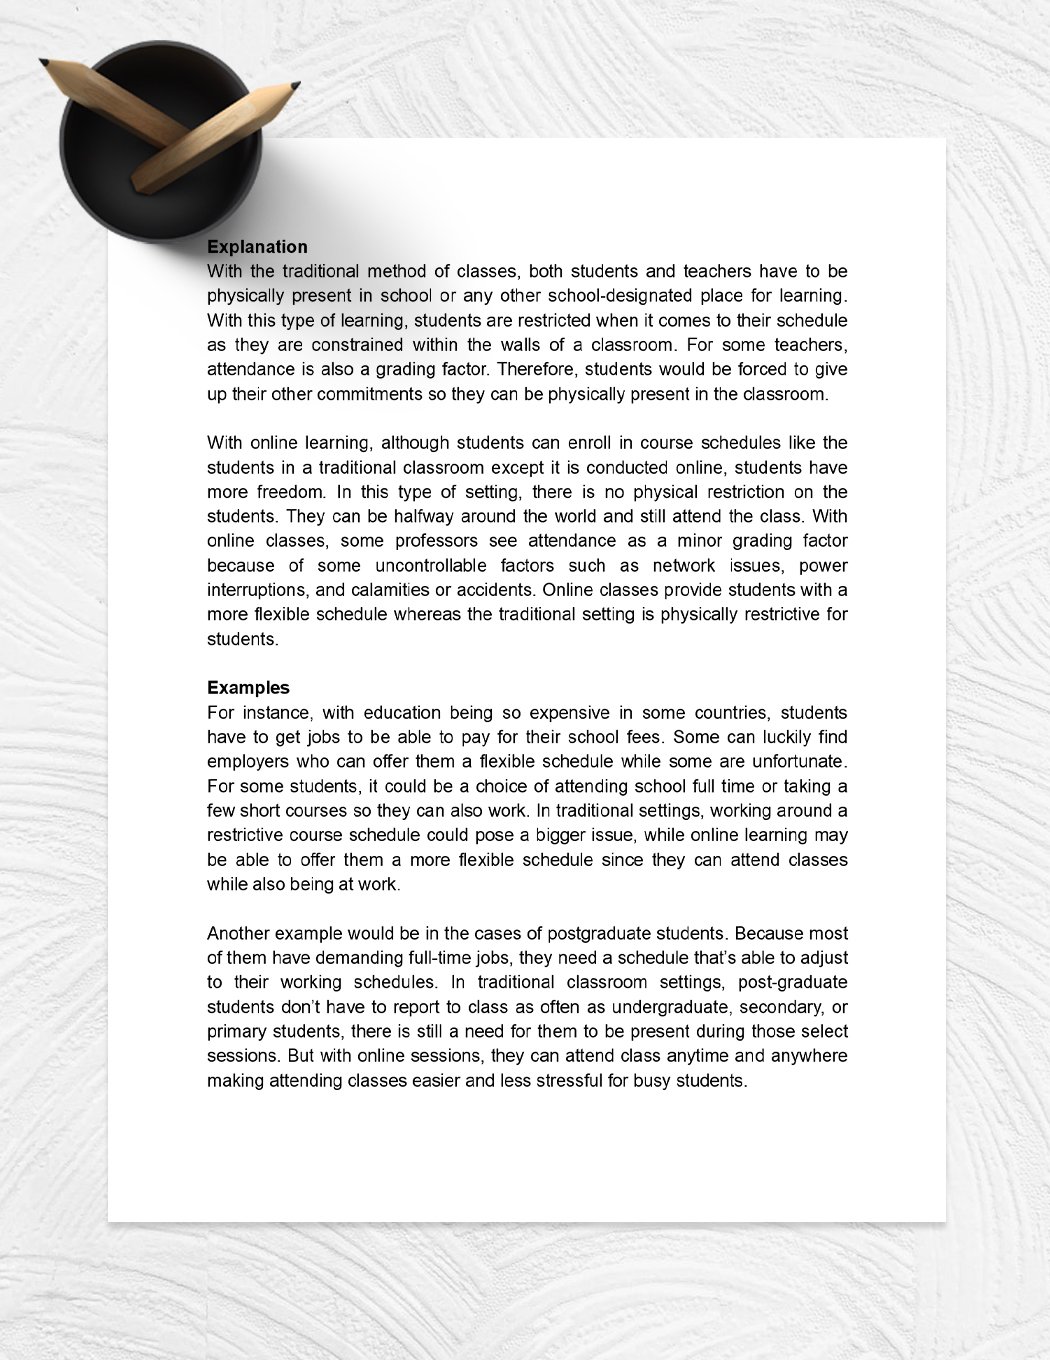 Compare and Contrast Essay Template